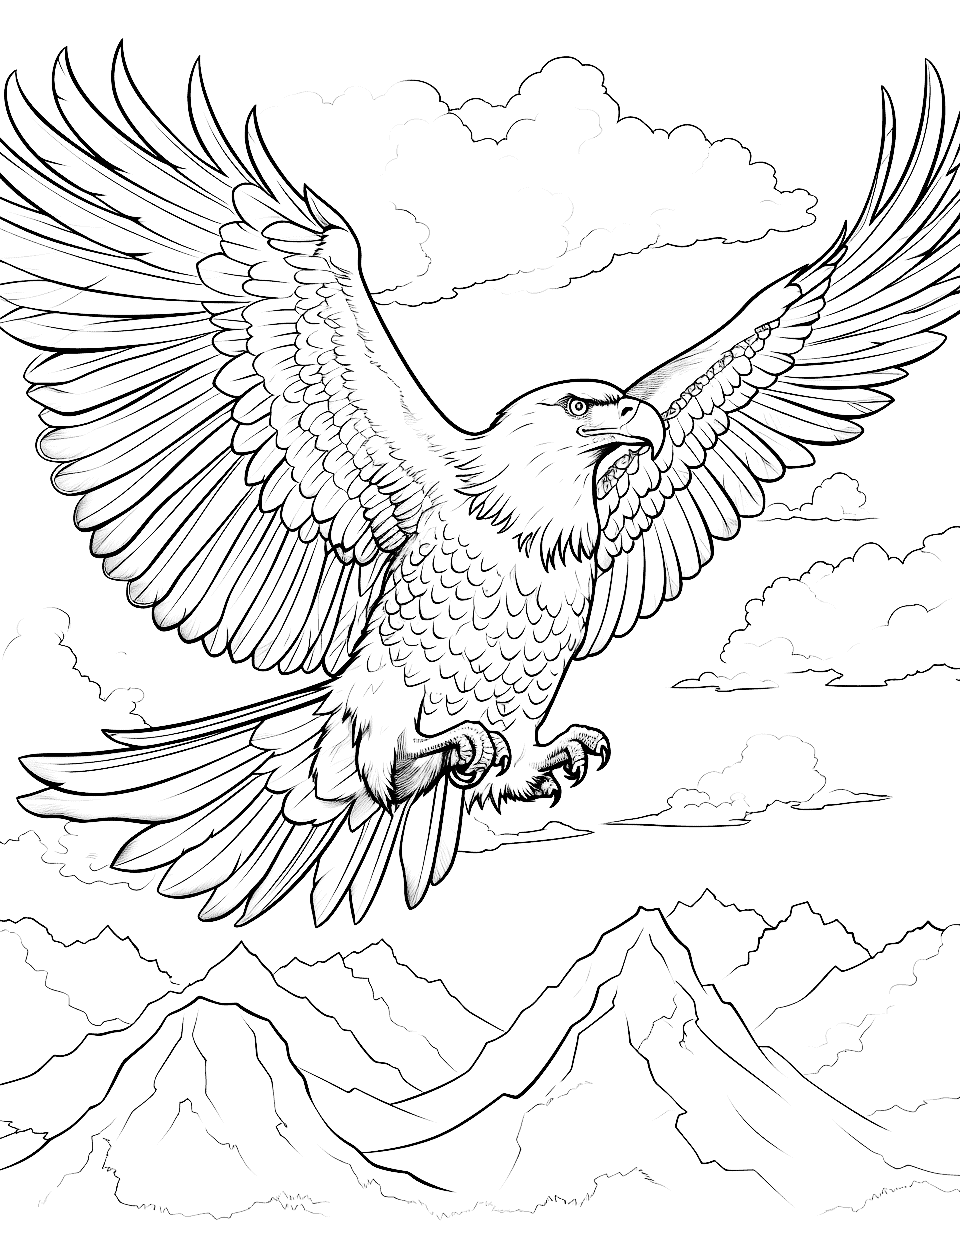 Eagle's Skyward View Adult Coloring Page - An eagle soaring above the clouds.